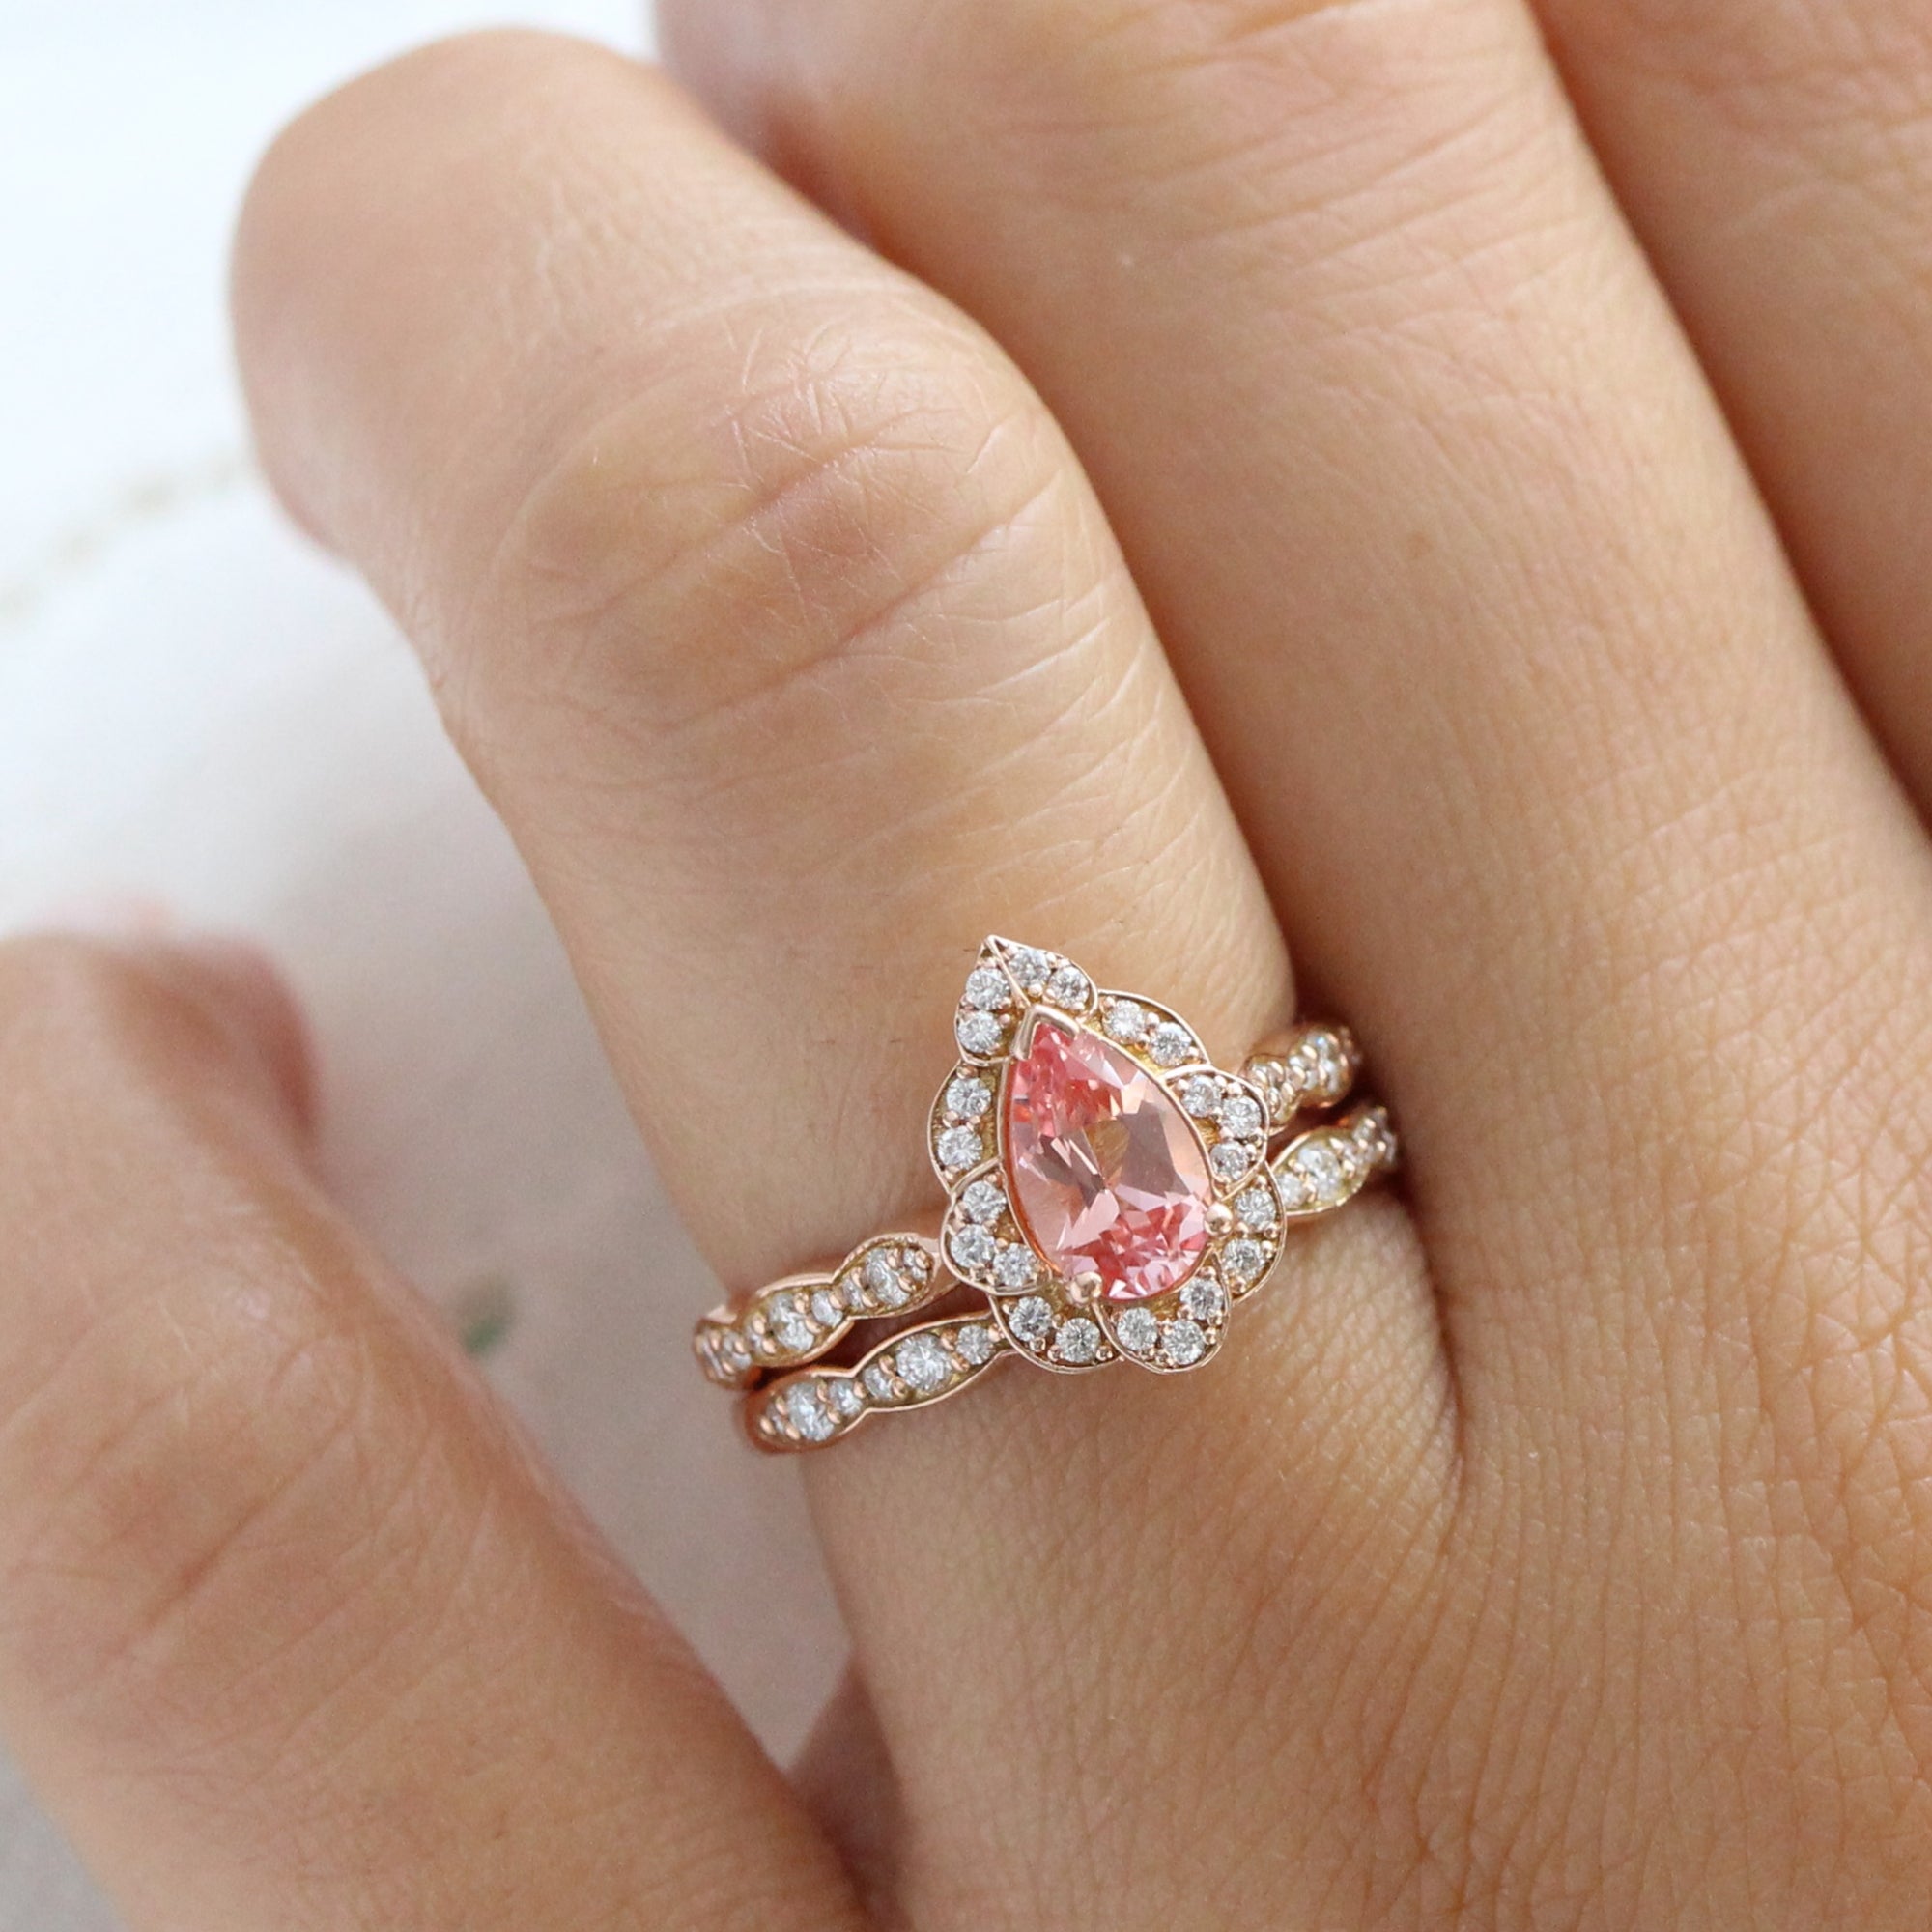 Pear peach sapphire engagement ring stack rose gold vintage halo diamond sapphire ring la more design jewelry